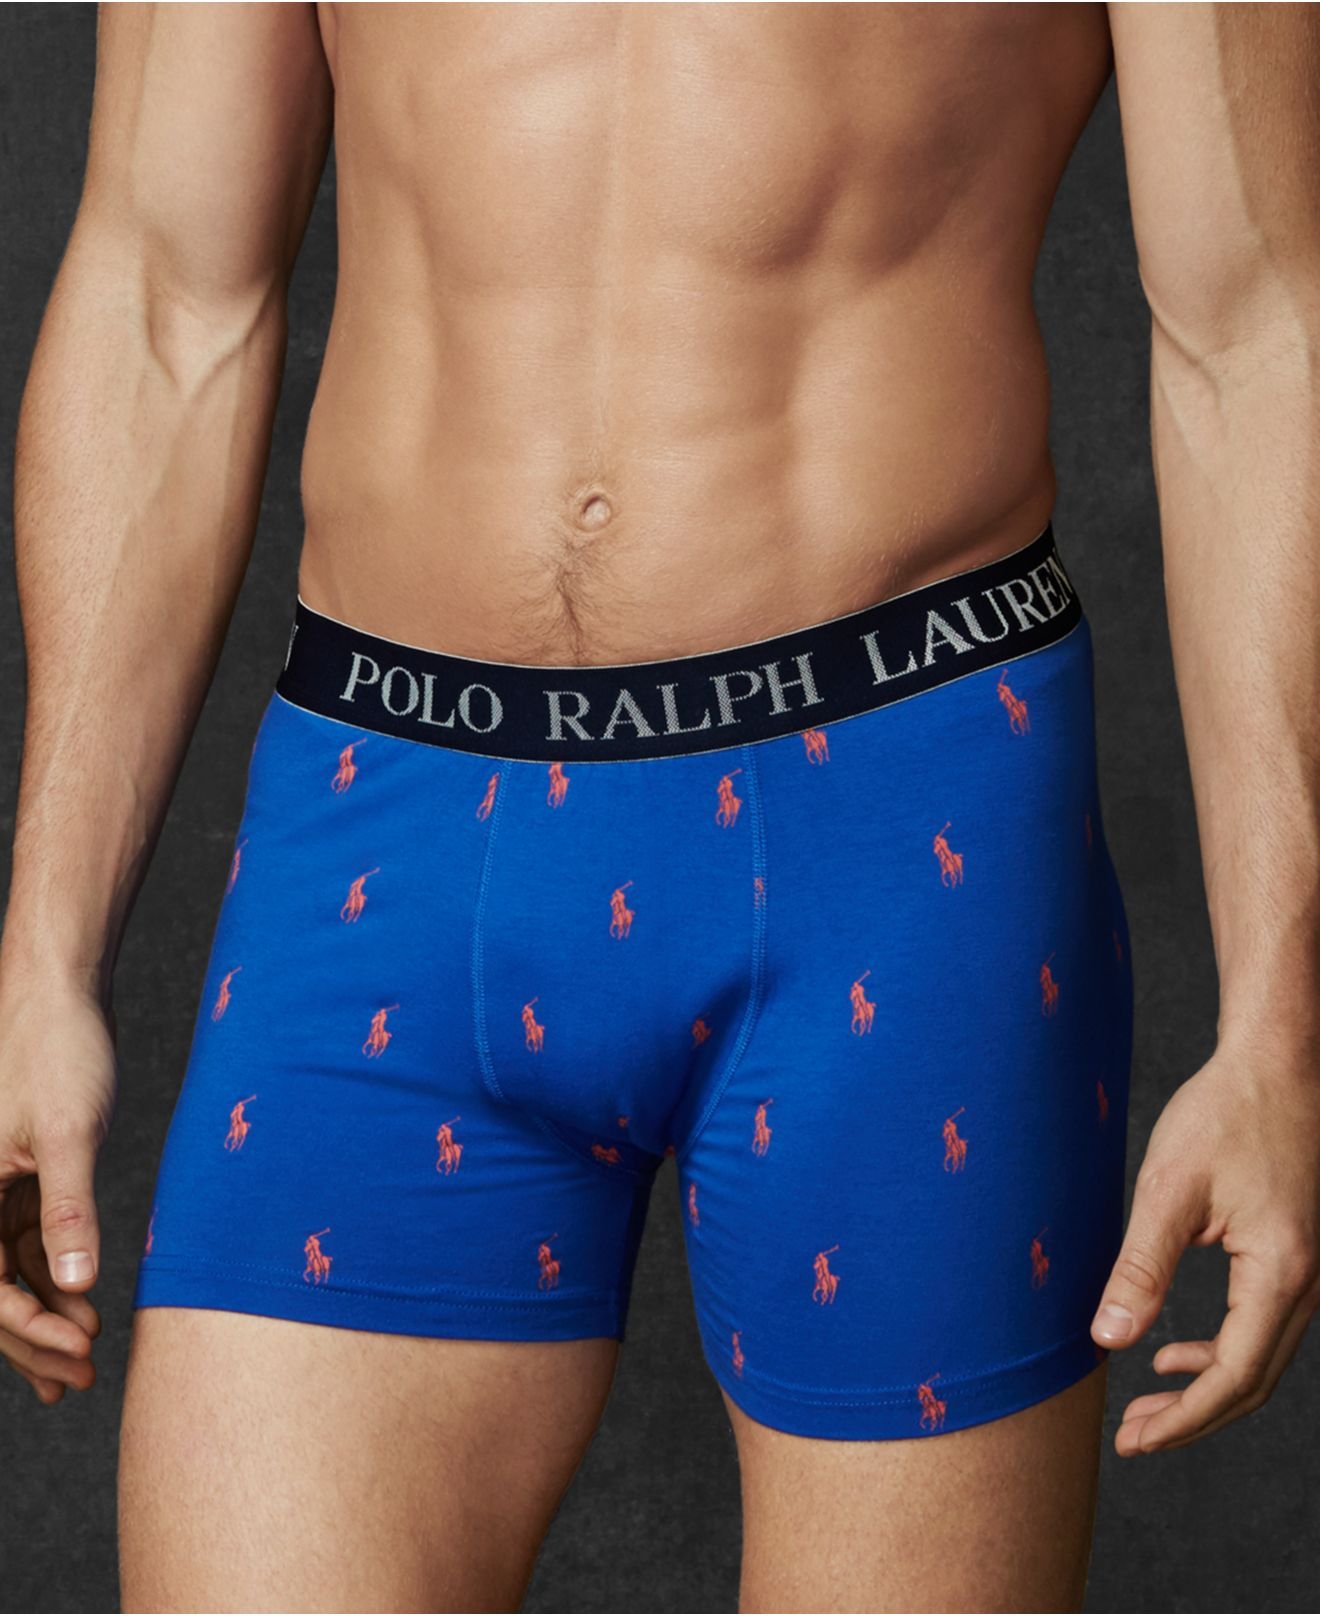 mens boxer briefs with horizontal fly